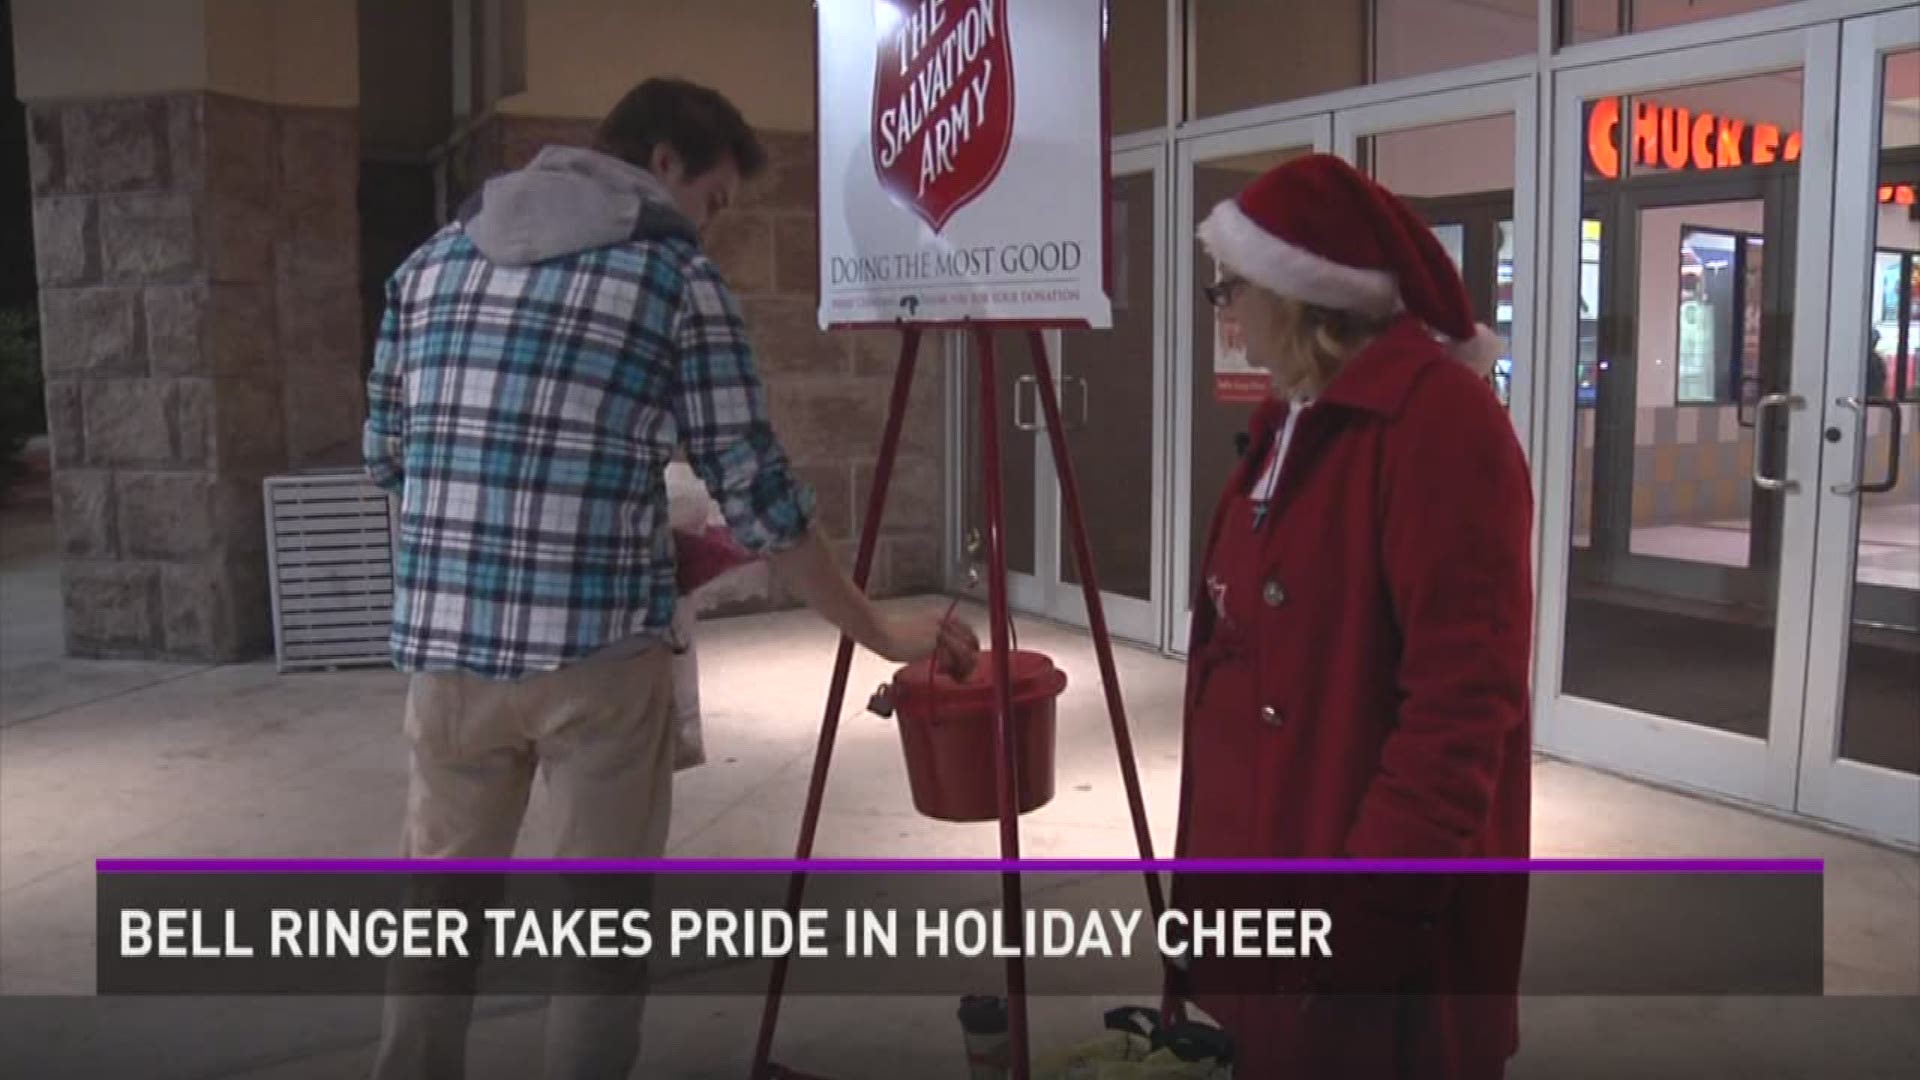 Peggy Campise has been a Salvation Army Bell Ringer for 20 years.